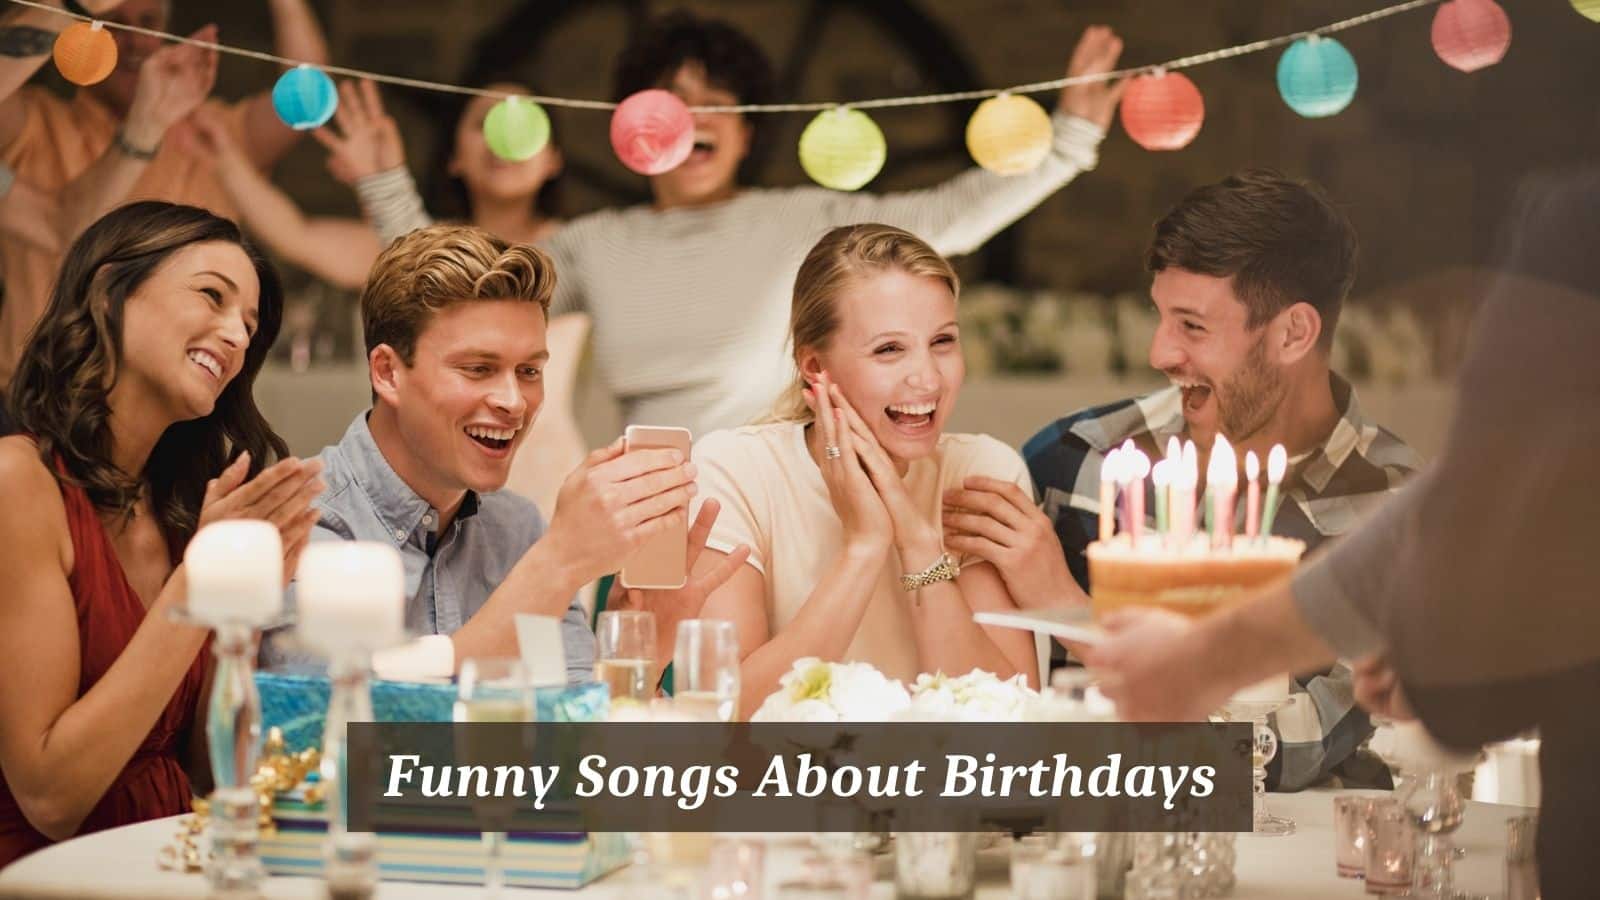 Funny Songs About Birthdays